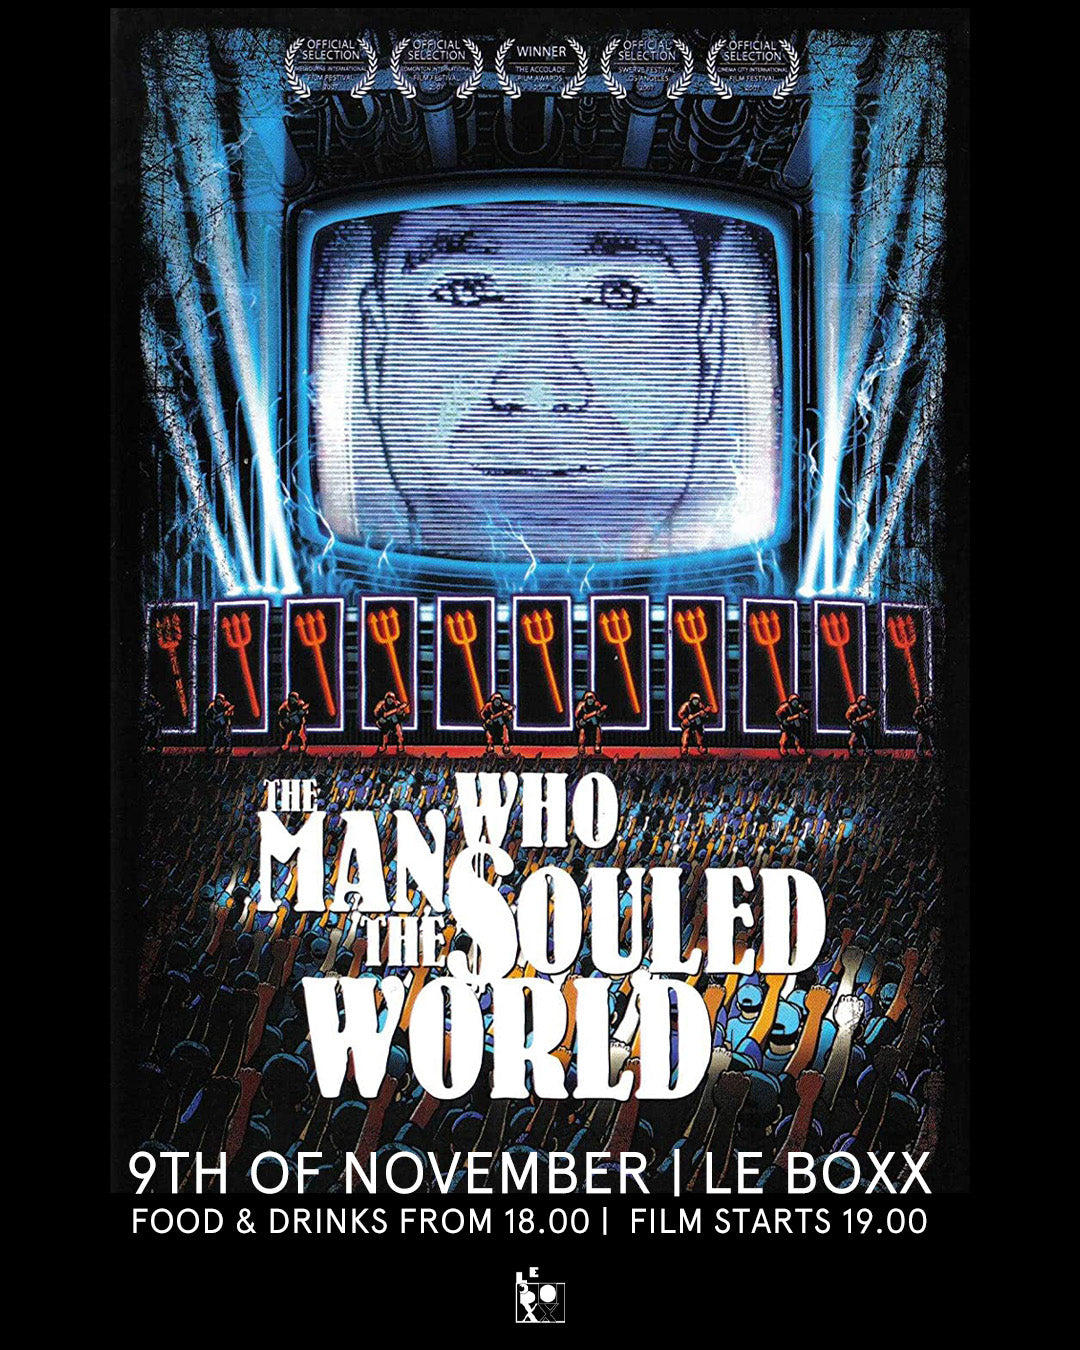 Screening of "The man who souled the world" | 9 November